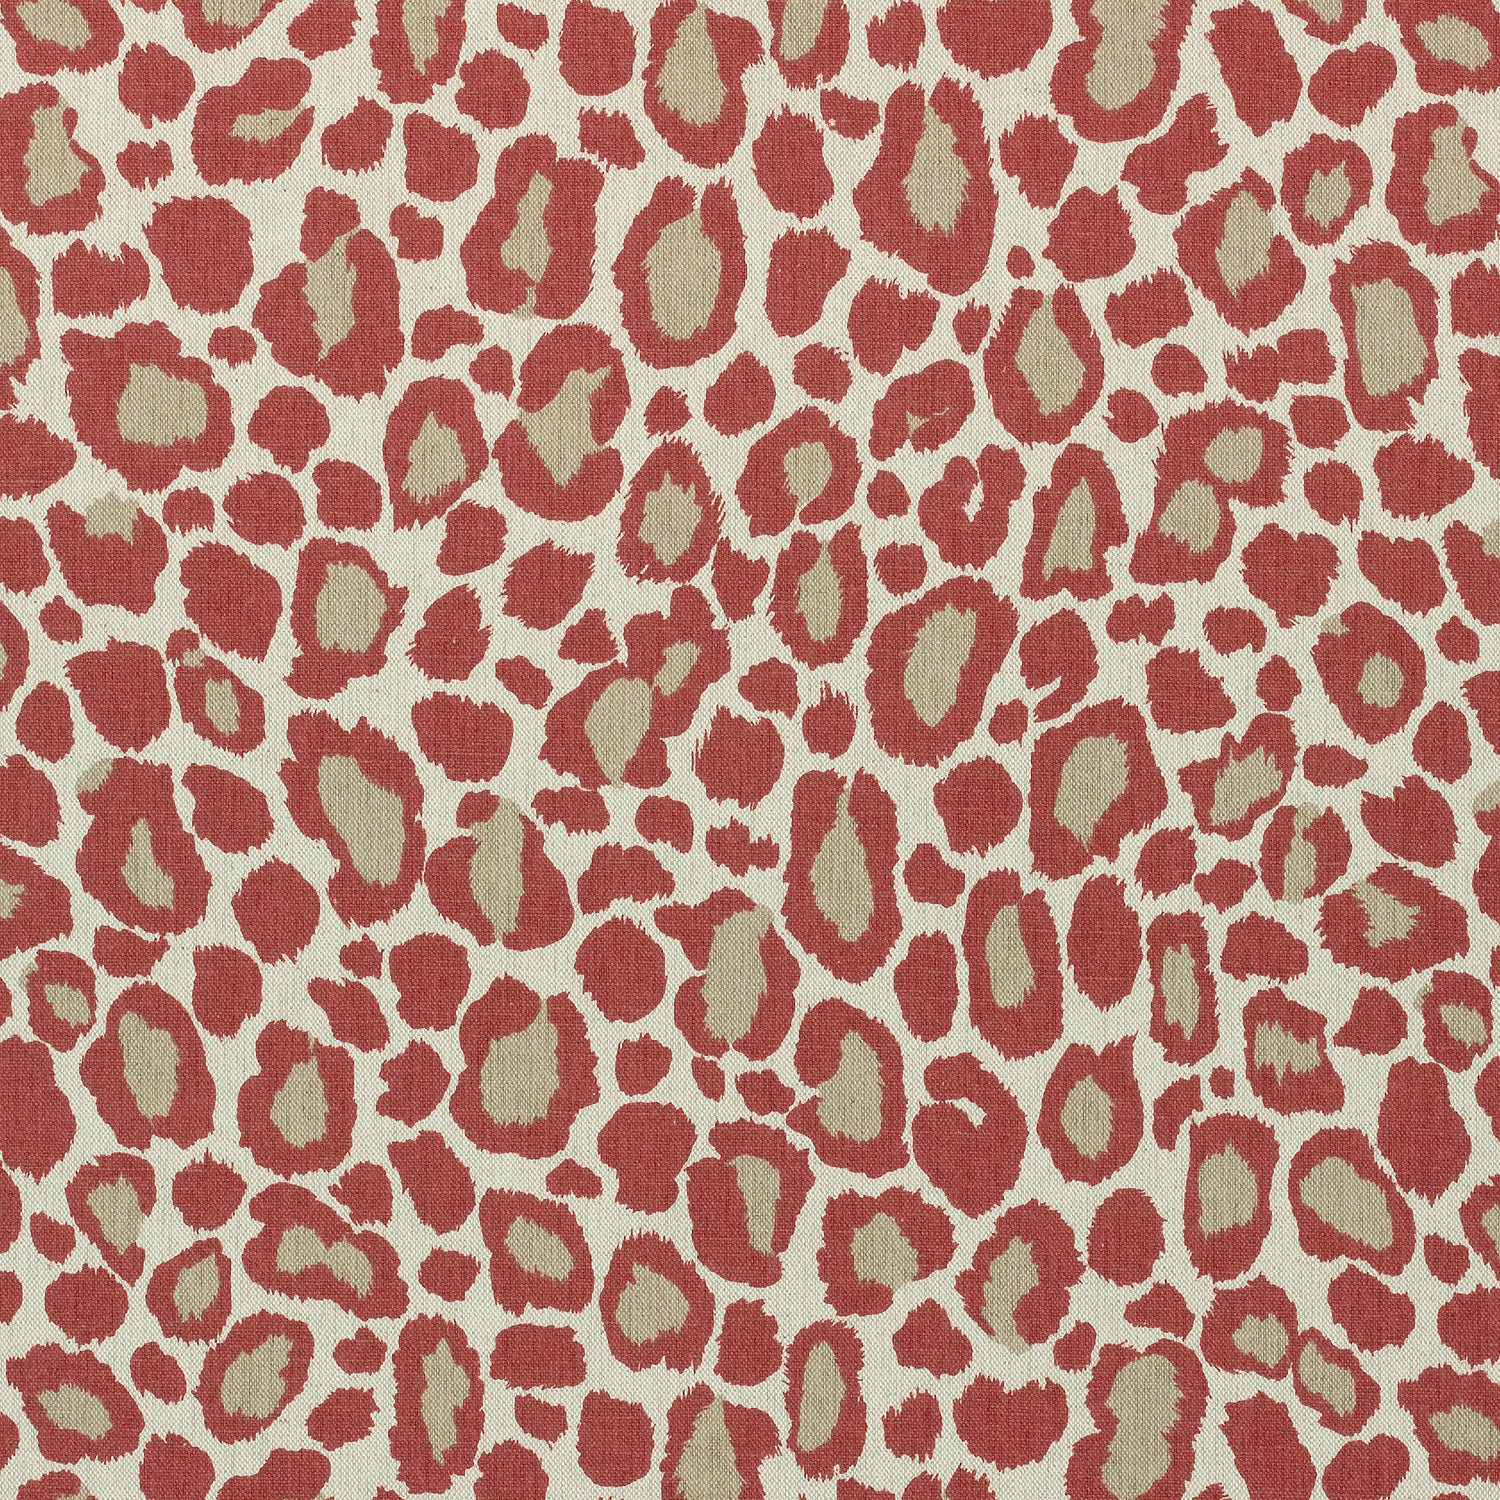 African Leopard fabric in coral color - pattern number AF72979 - by Anna French in the Manor collection